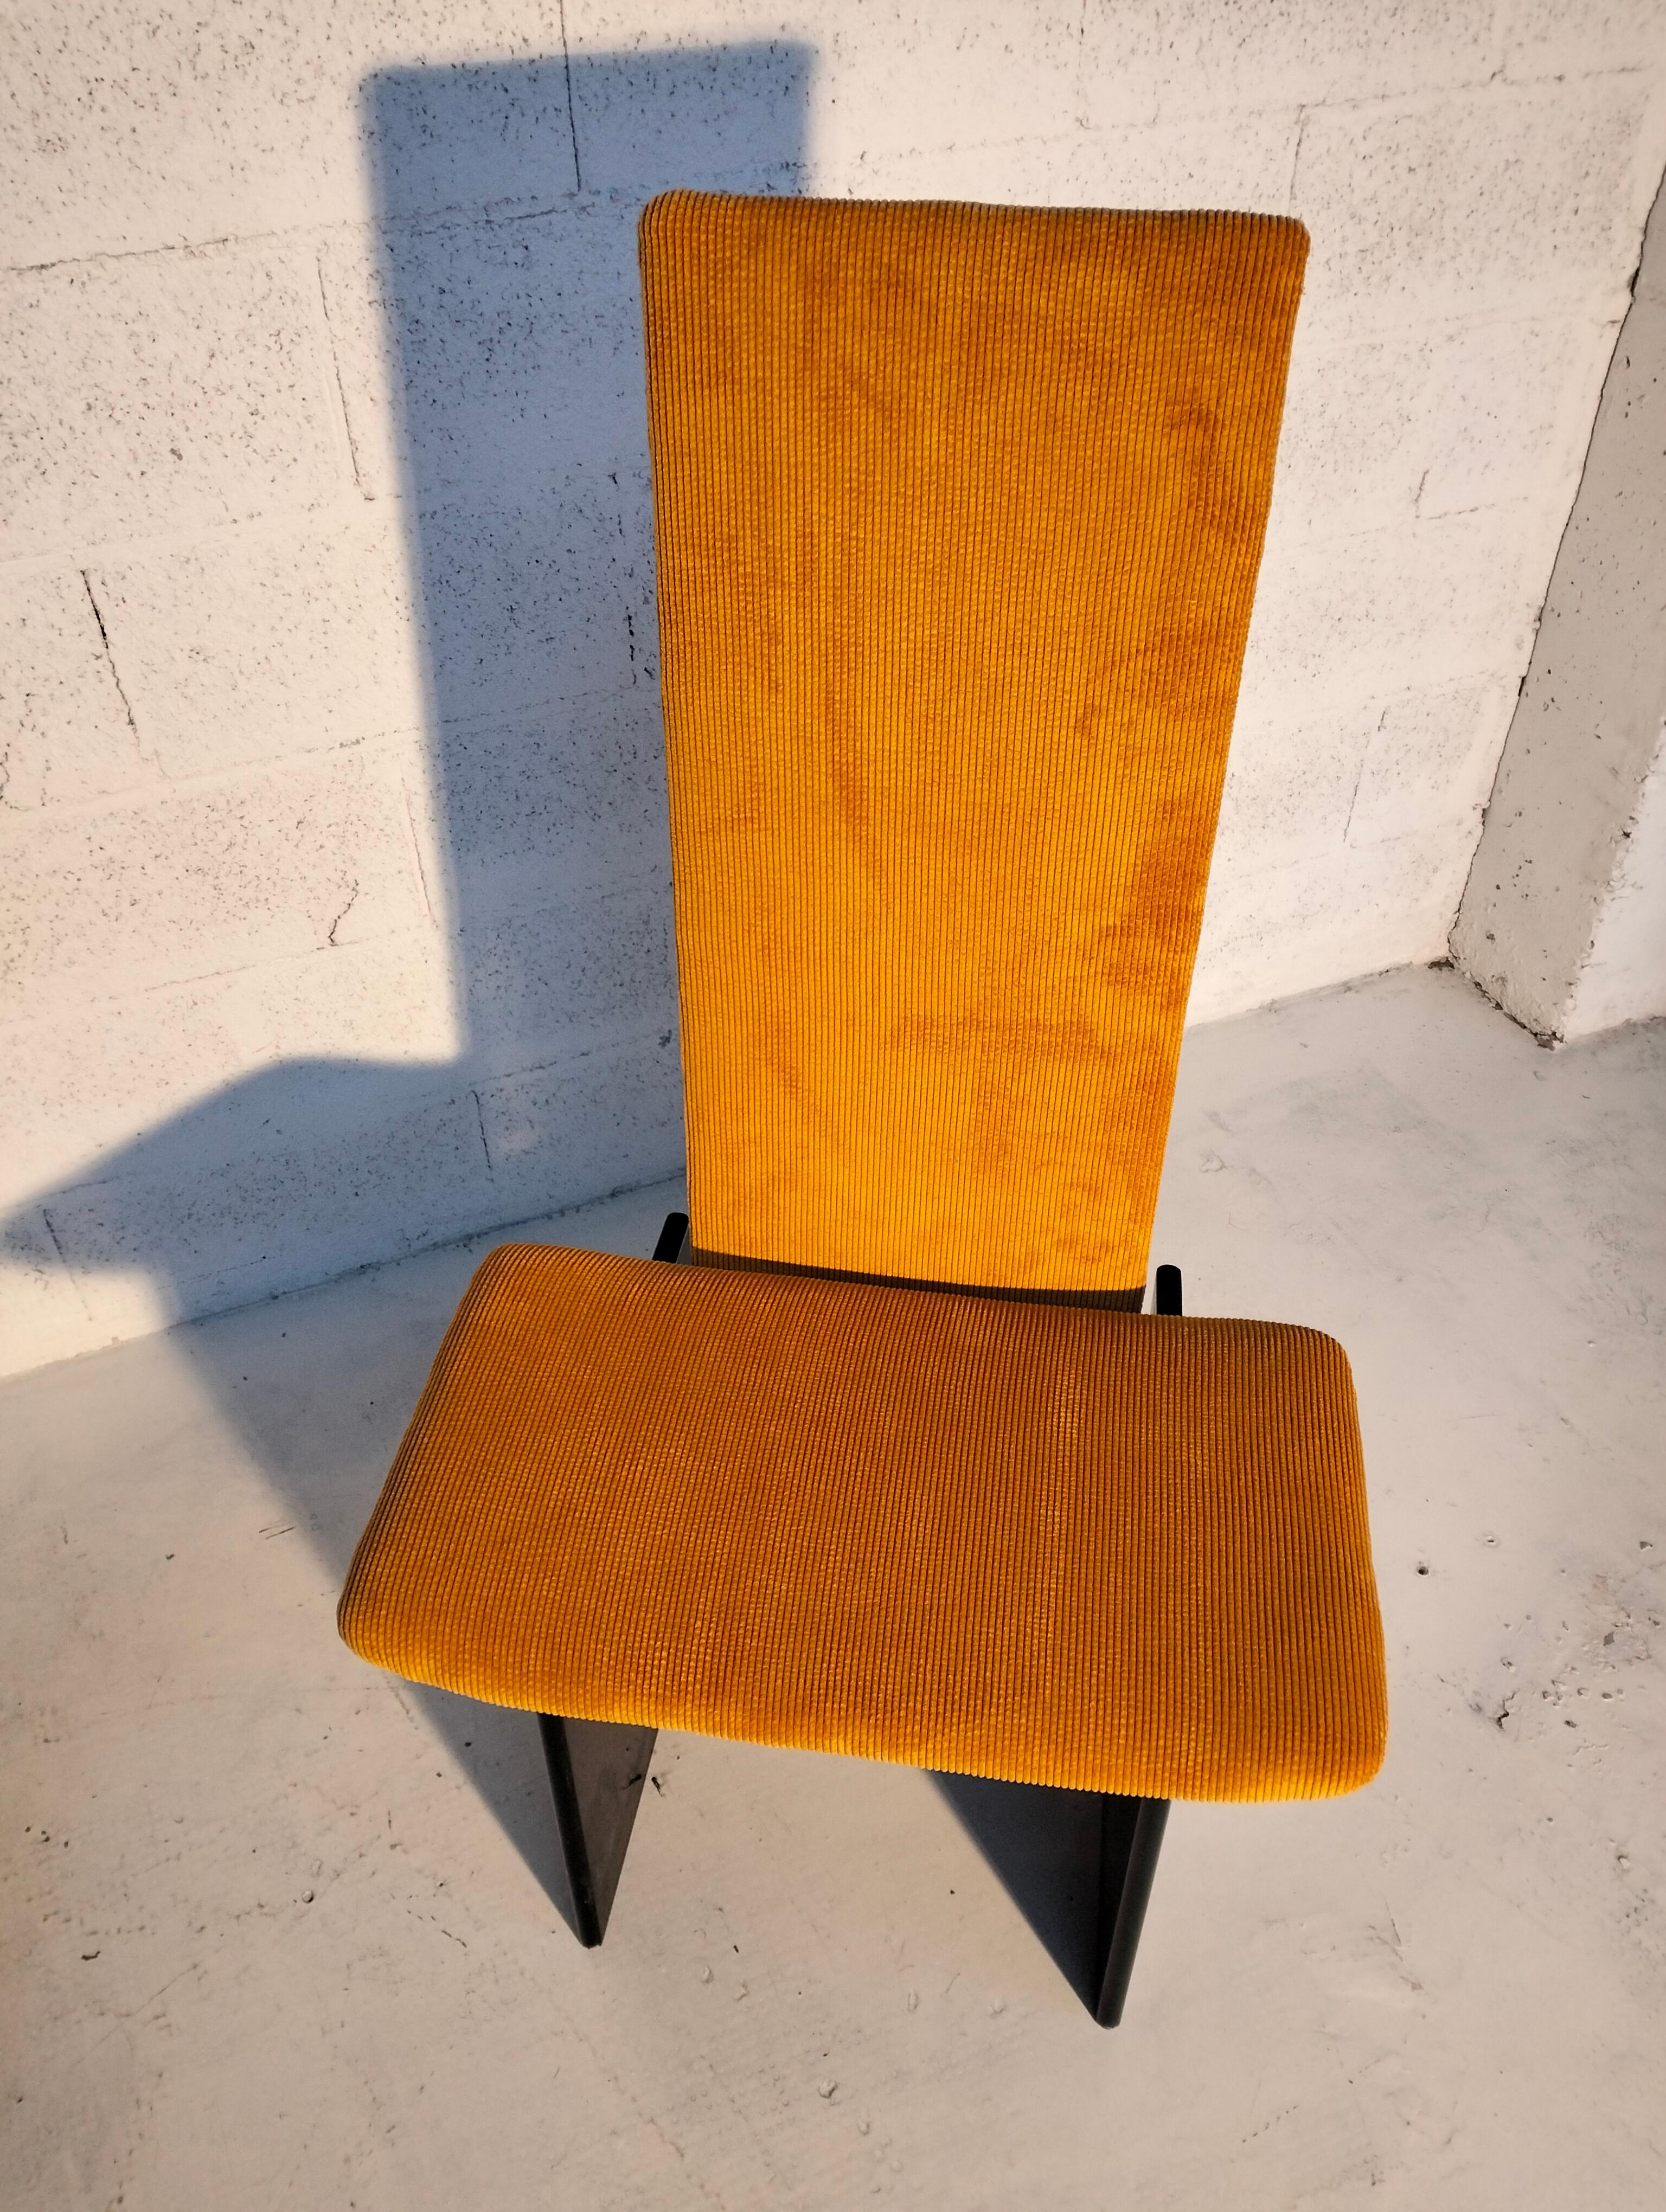 Late 20th Century Set of 2 ocra yellow chairs Rennie mod. by K. Takahama for S. Gavina 70's, Italy For Sale